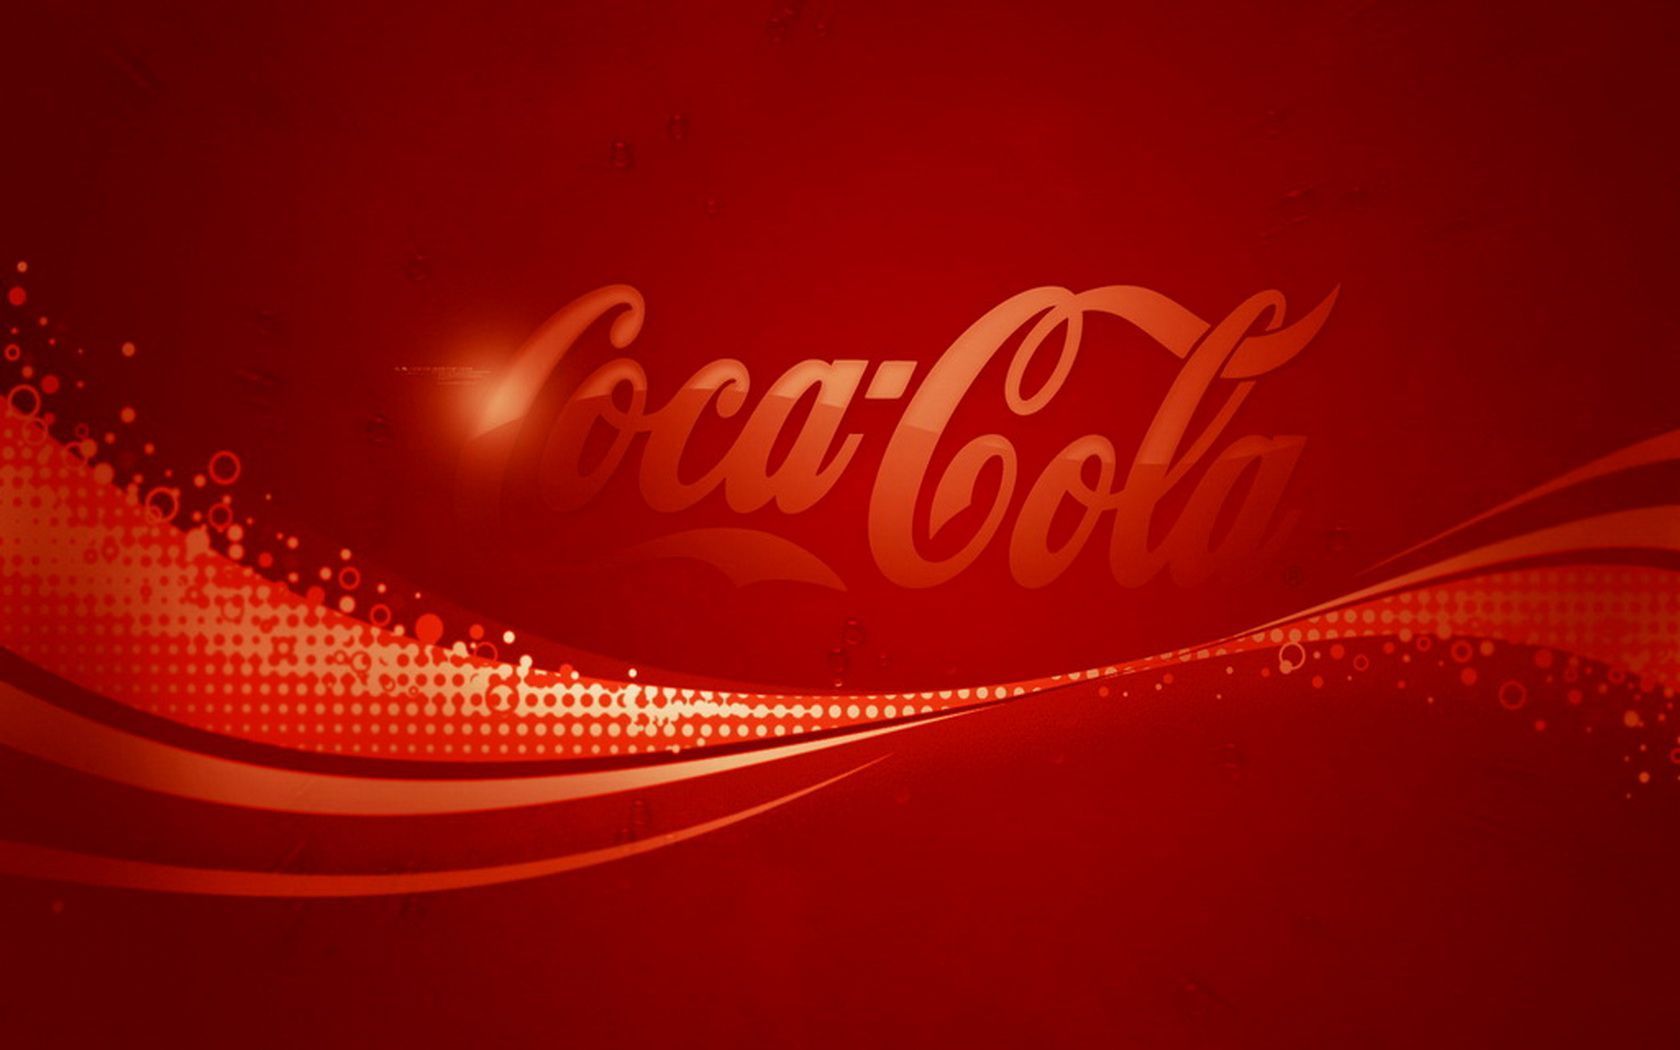 92 Coca Cola HD Wallpapers | Backgrounds - Wallpaper Abyss - Page 2